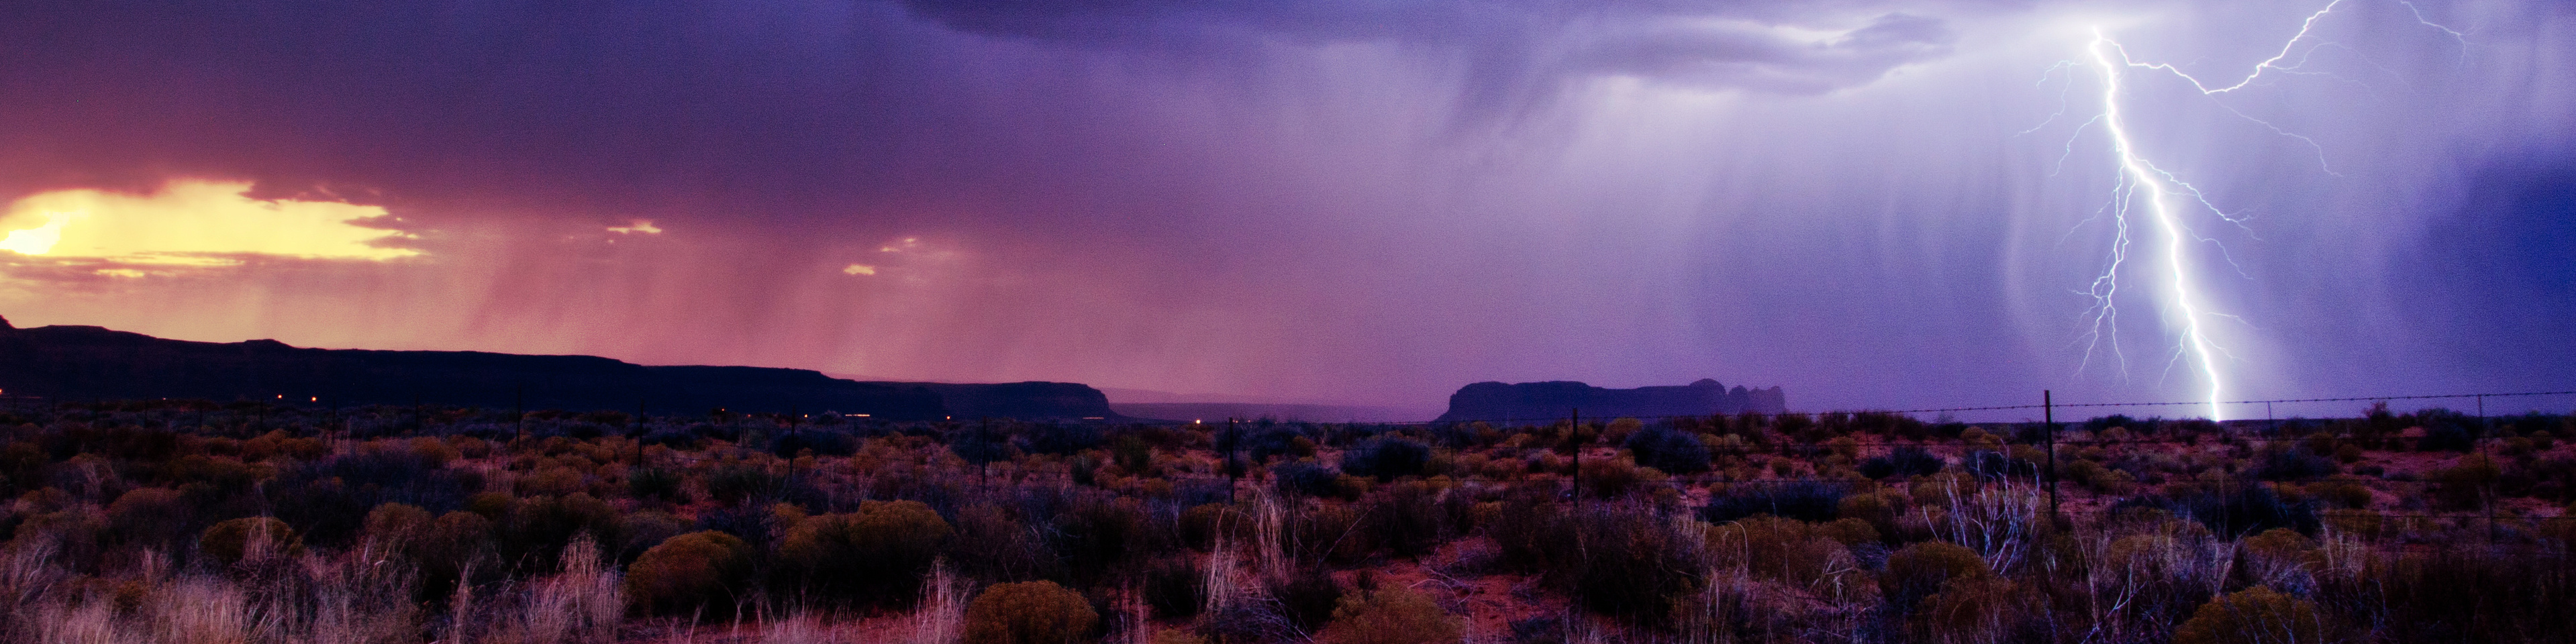 Tax relief for victims of severe storms in Arizona: IRA and HSA deadlines postponed